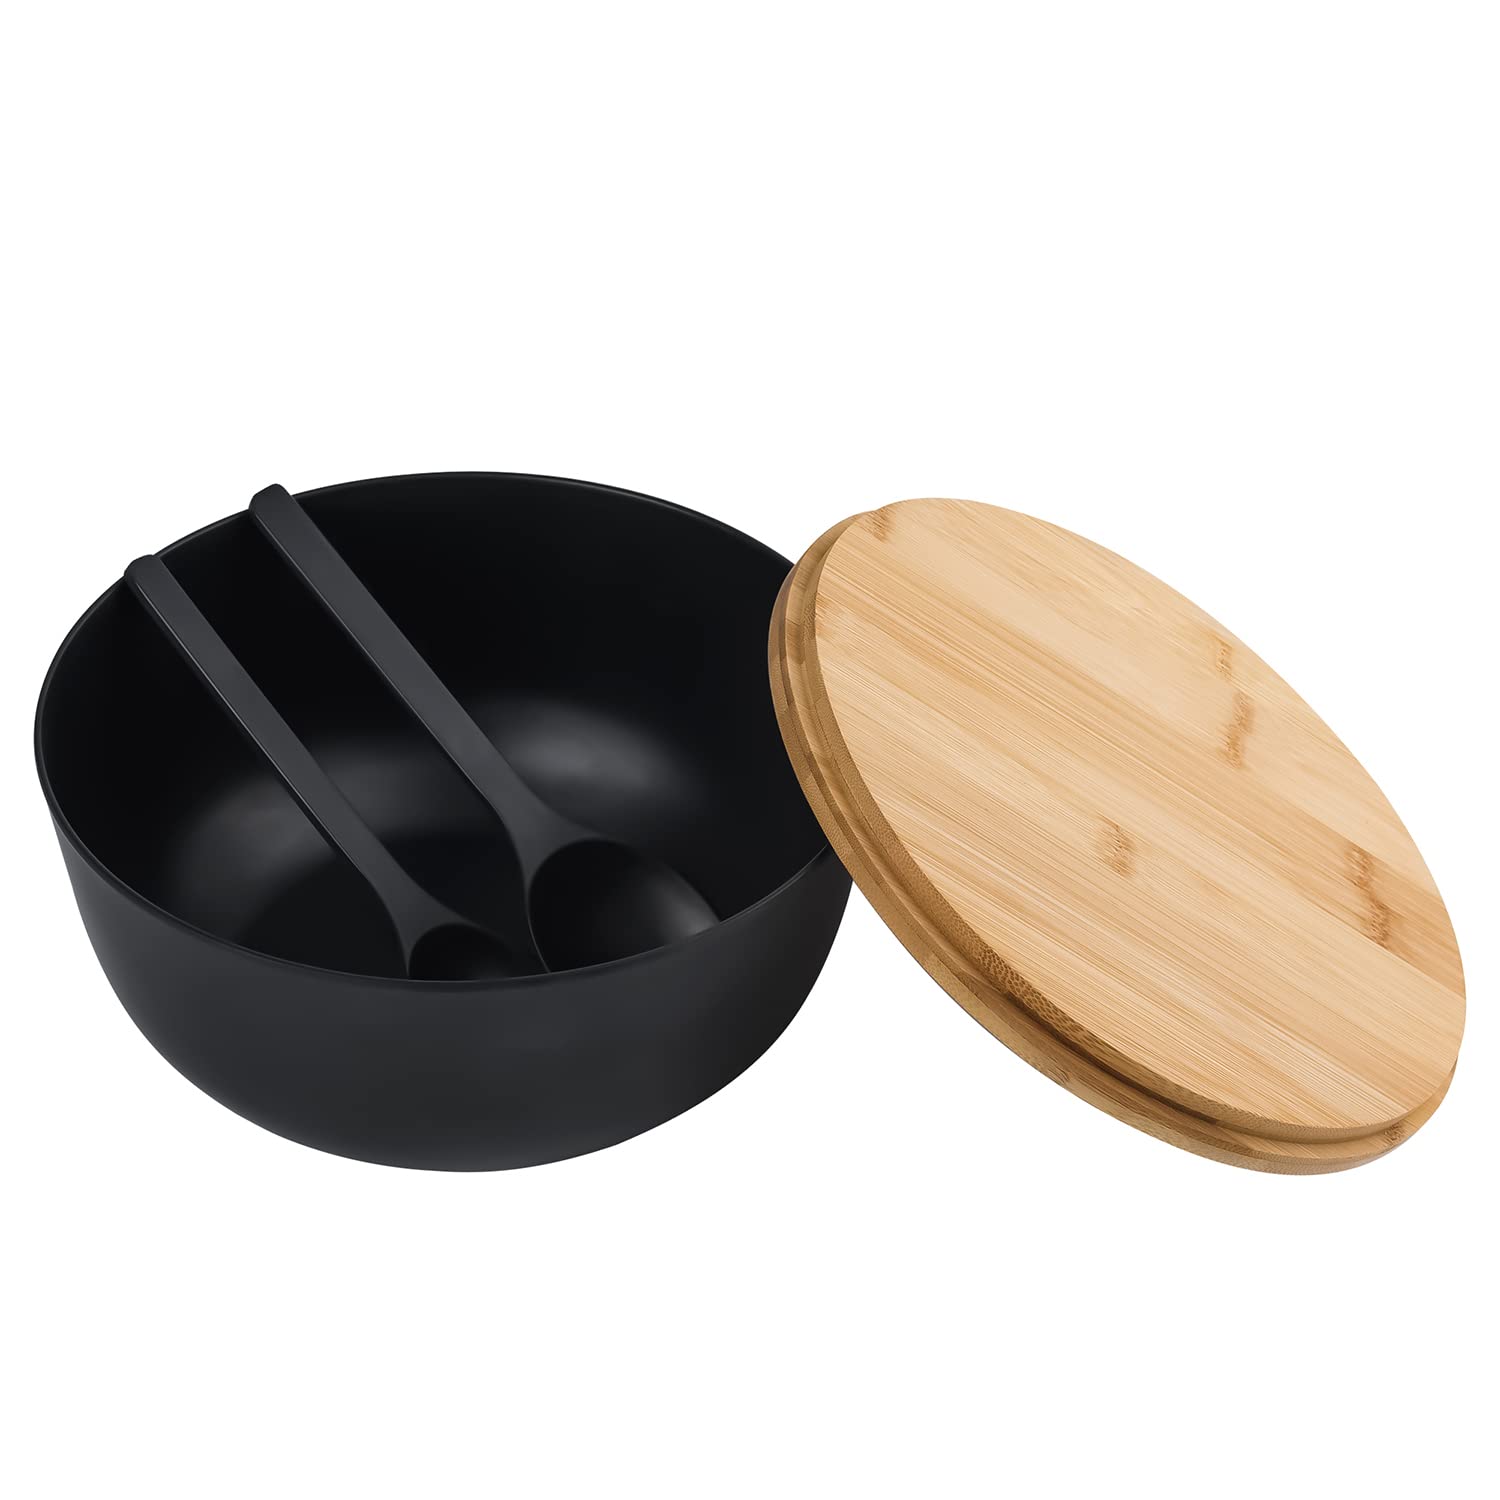 LOVYANXUE Bamboo Fiber Salad Bowl with Servers Set Large 9.8inches Nature Bamboo Mixing Bowl with Servers with Lid Spoon and Fork for Fruits ,Salads and Vegetables (Black, 10inch)